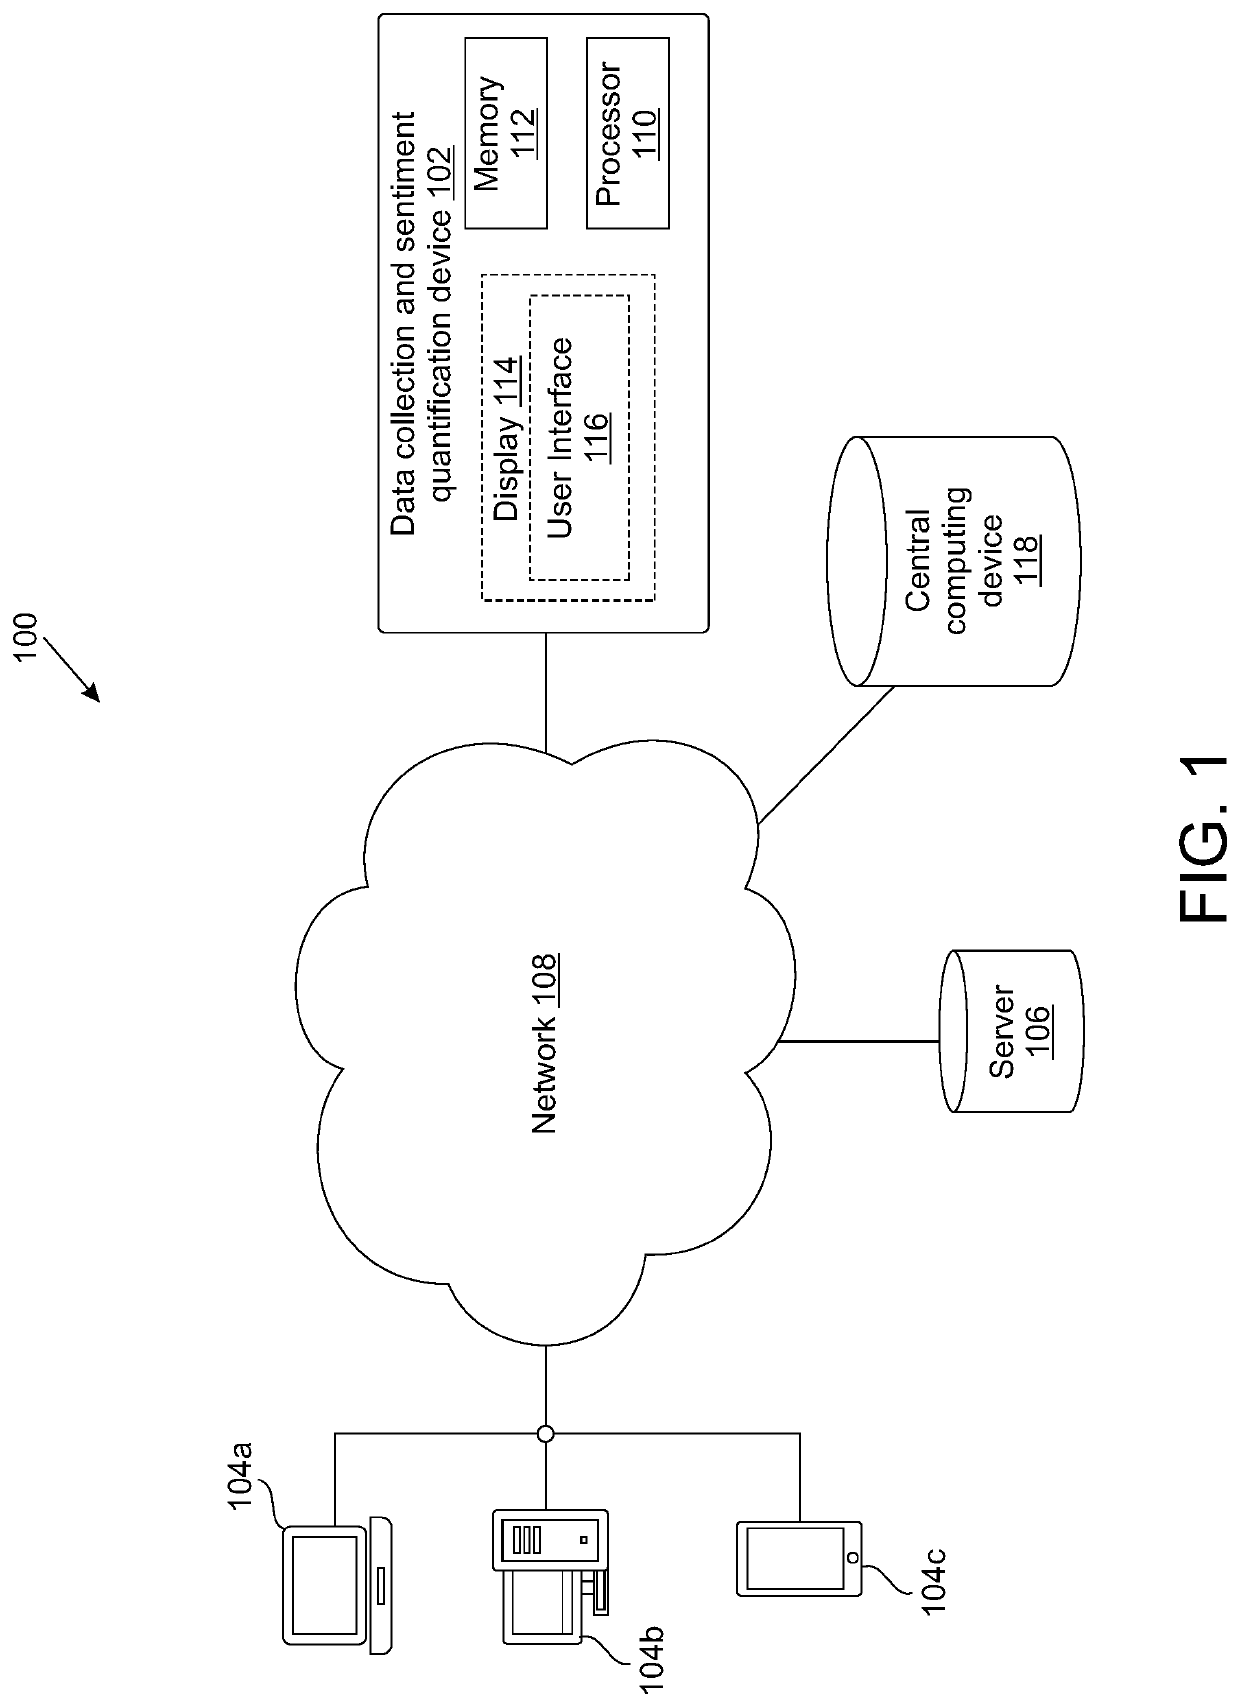 System and method to collect data to quantify sentiment of users and predict objective outcomes